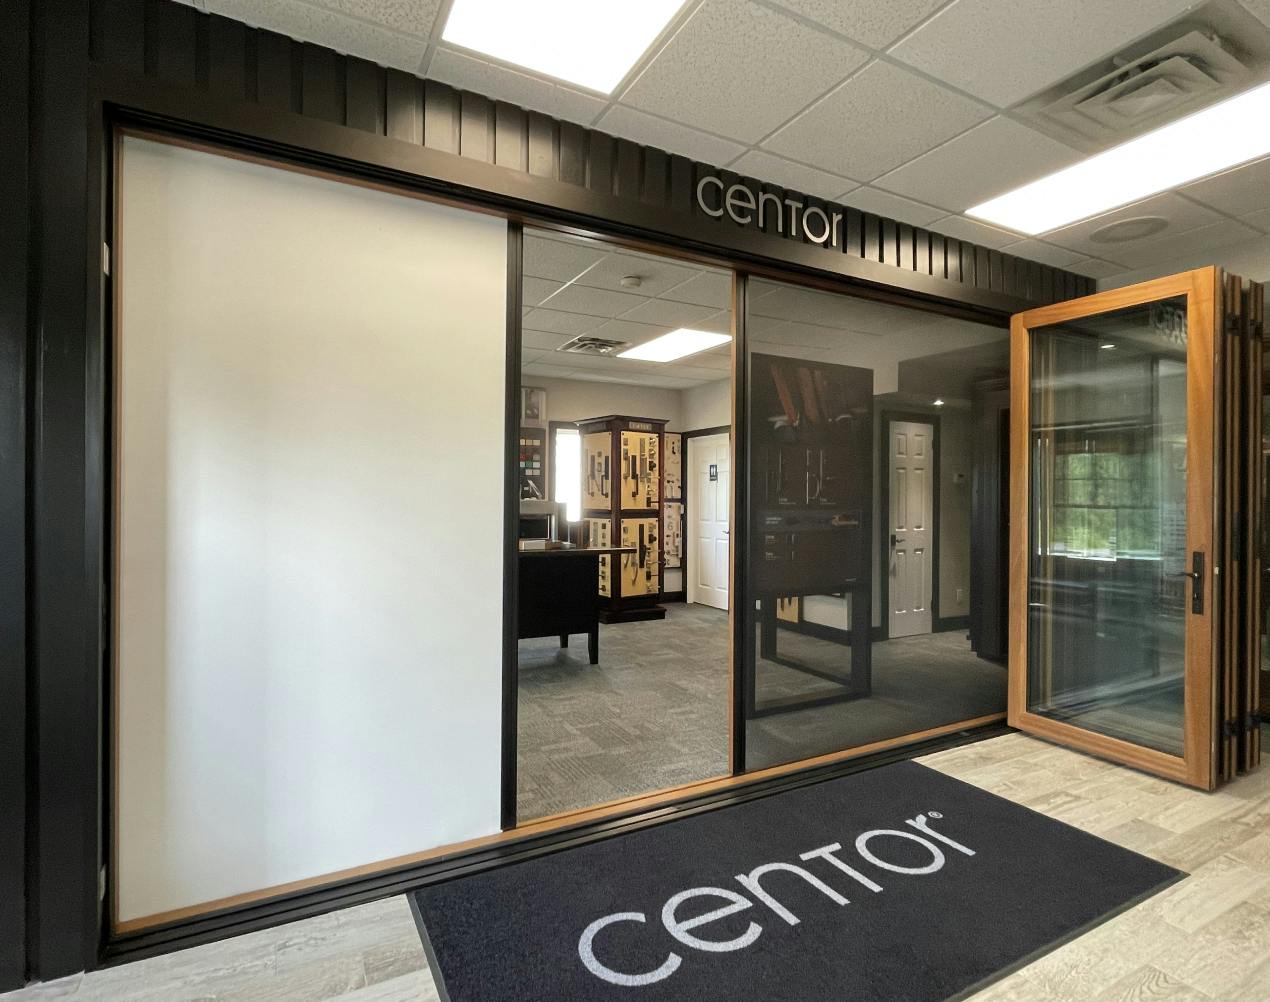 Centor integrated Screens, Blinds, and Shades